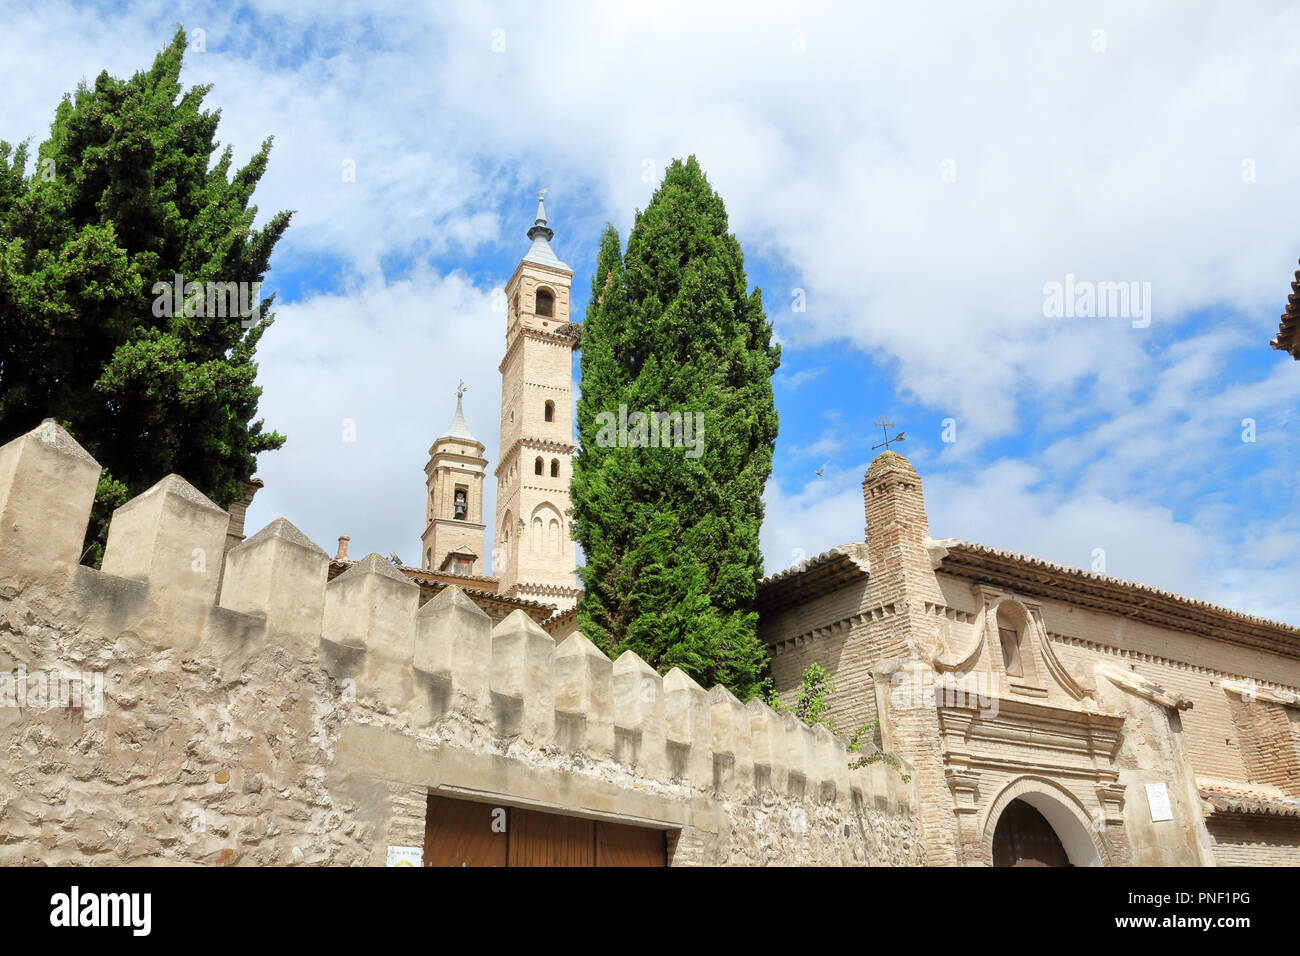 The bell tower of the Holy Mary Collegiate ( Colegiata de Santa Maria), seen from the Calle Goya street in Borja, a small Aragonese town in Spain Stock Photo